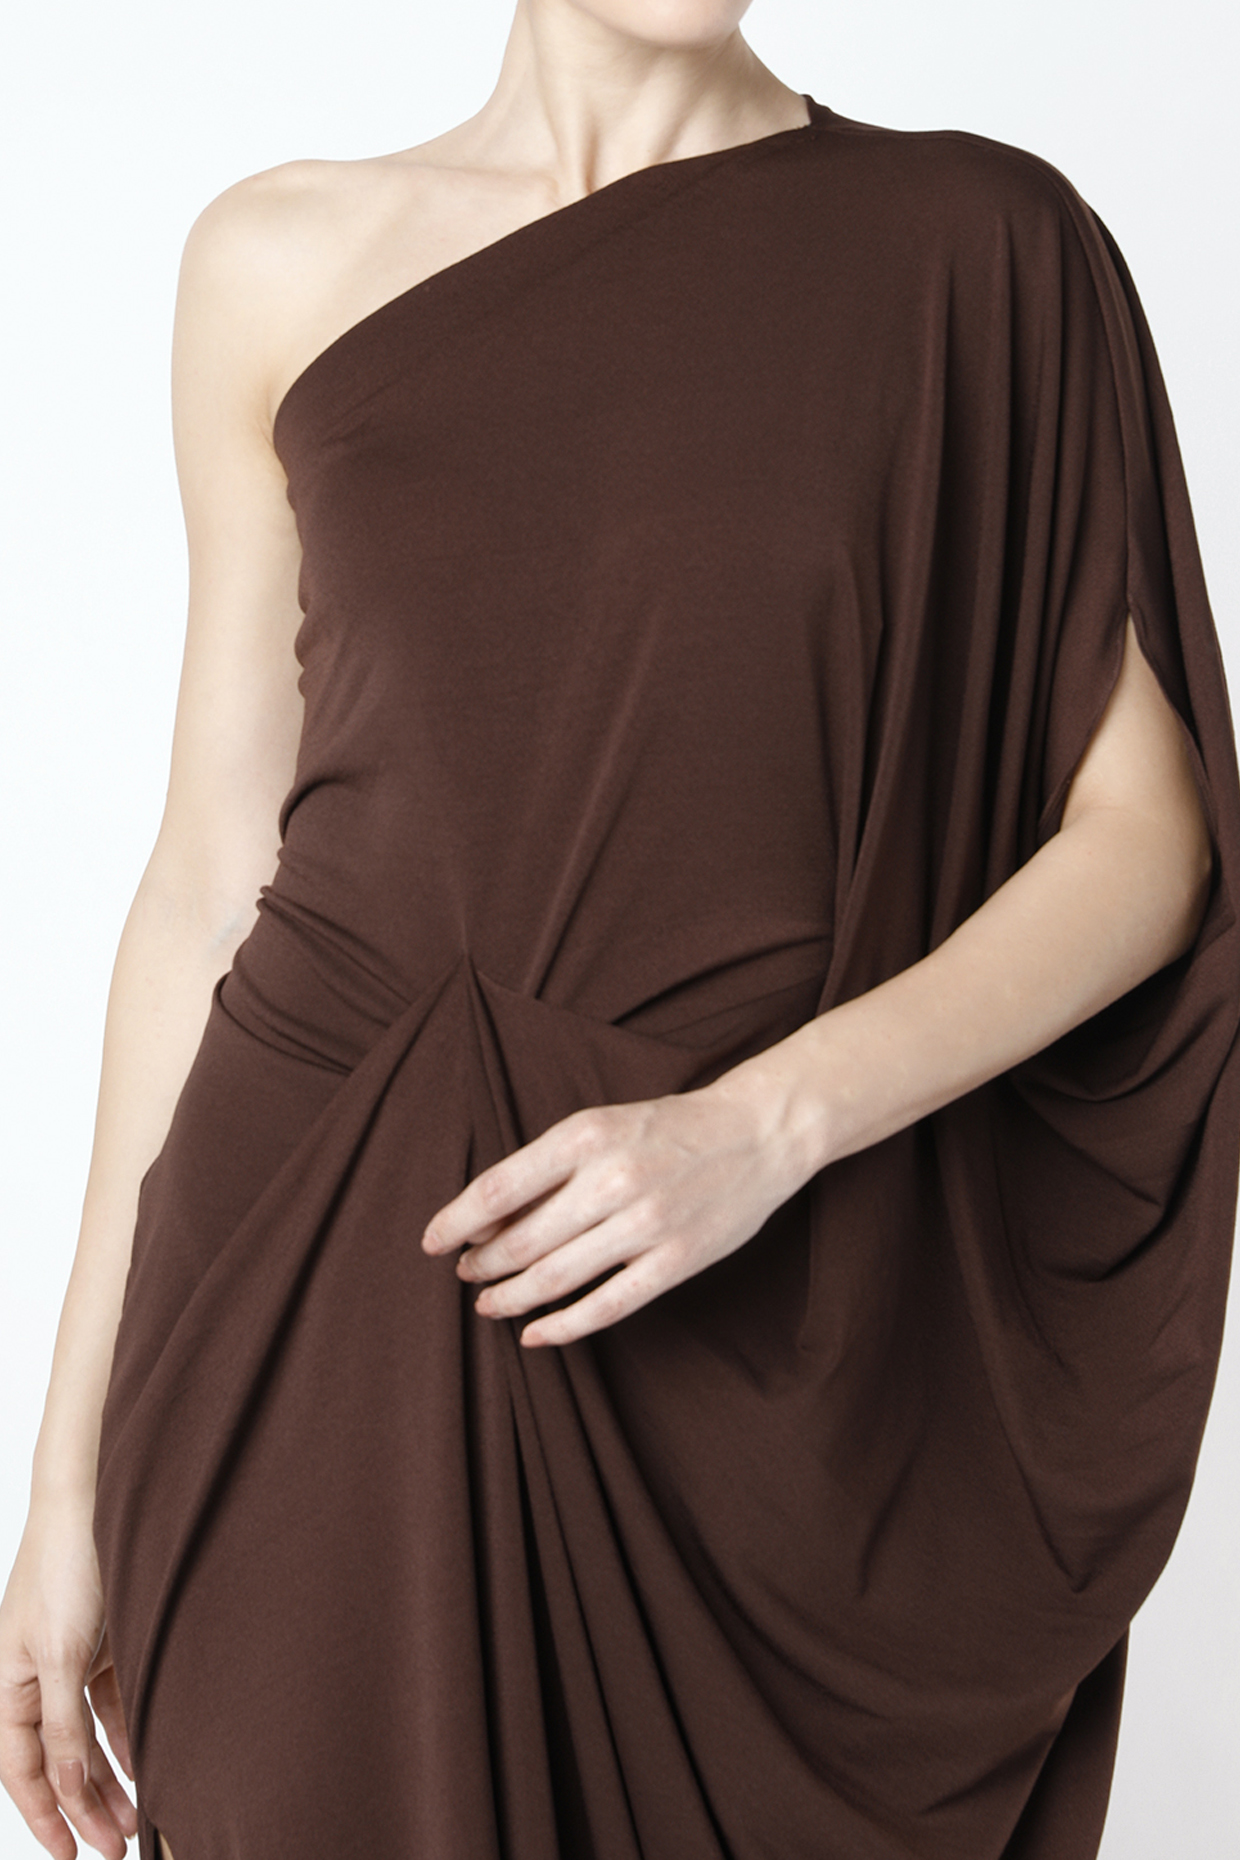 Brown One Shoulder Drape Gown with Detachable Sash